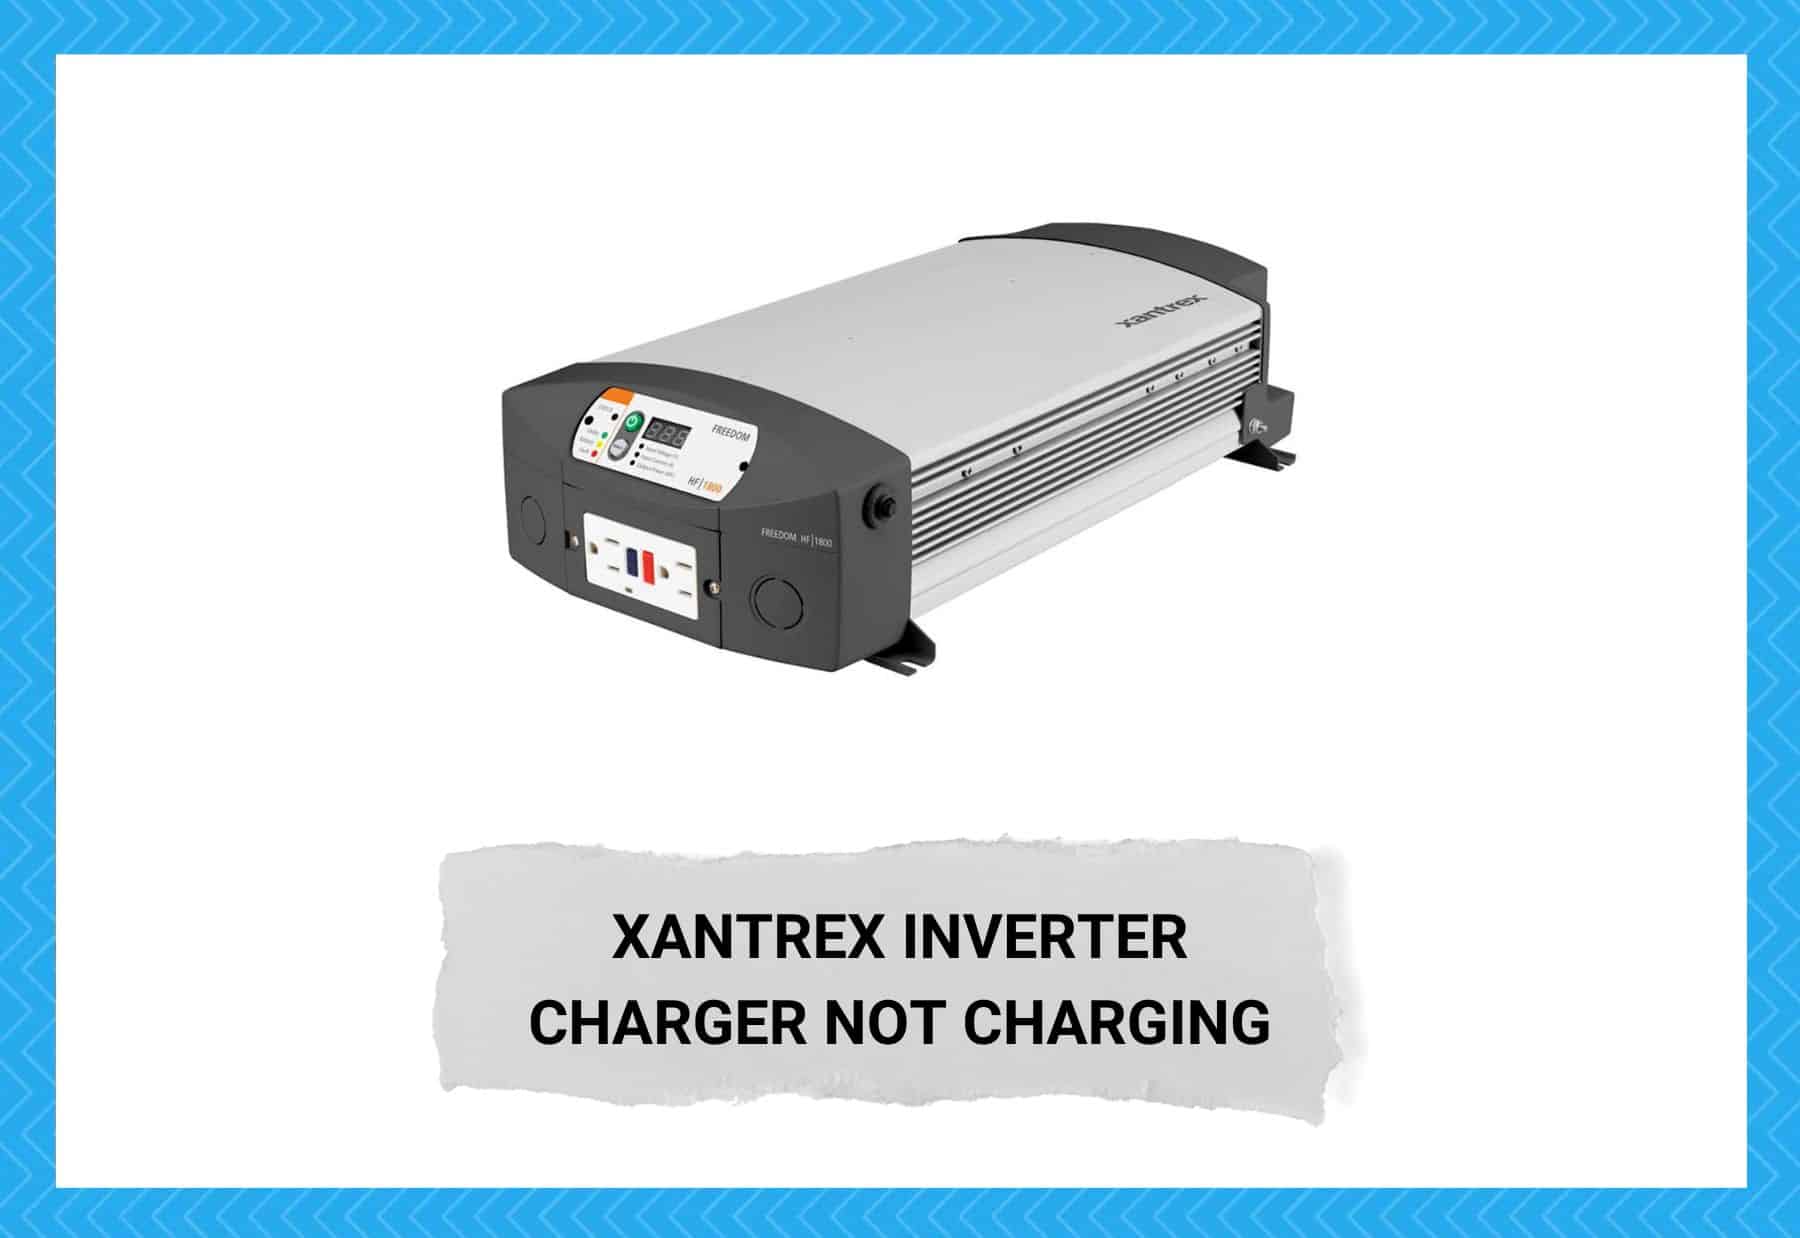 Xantrex Inverter Charger Not Charging